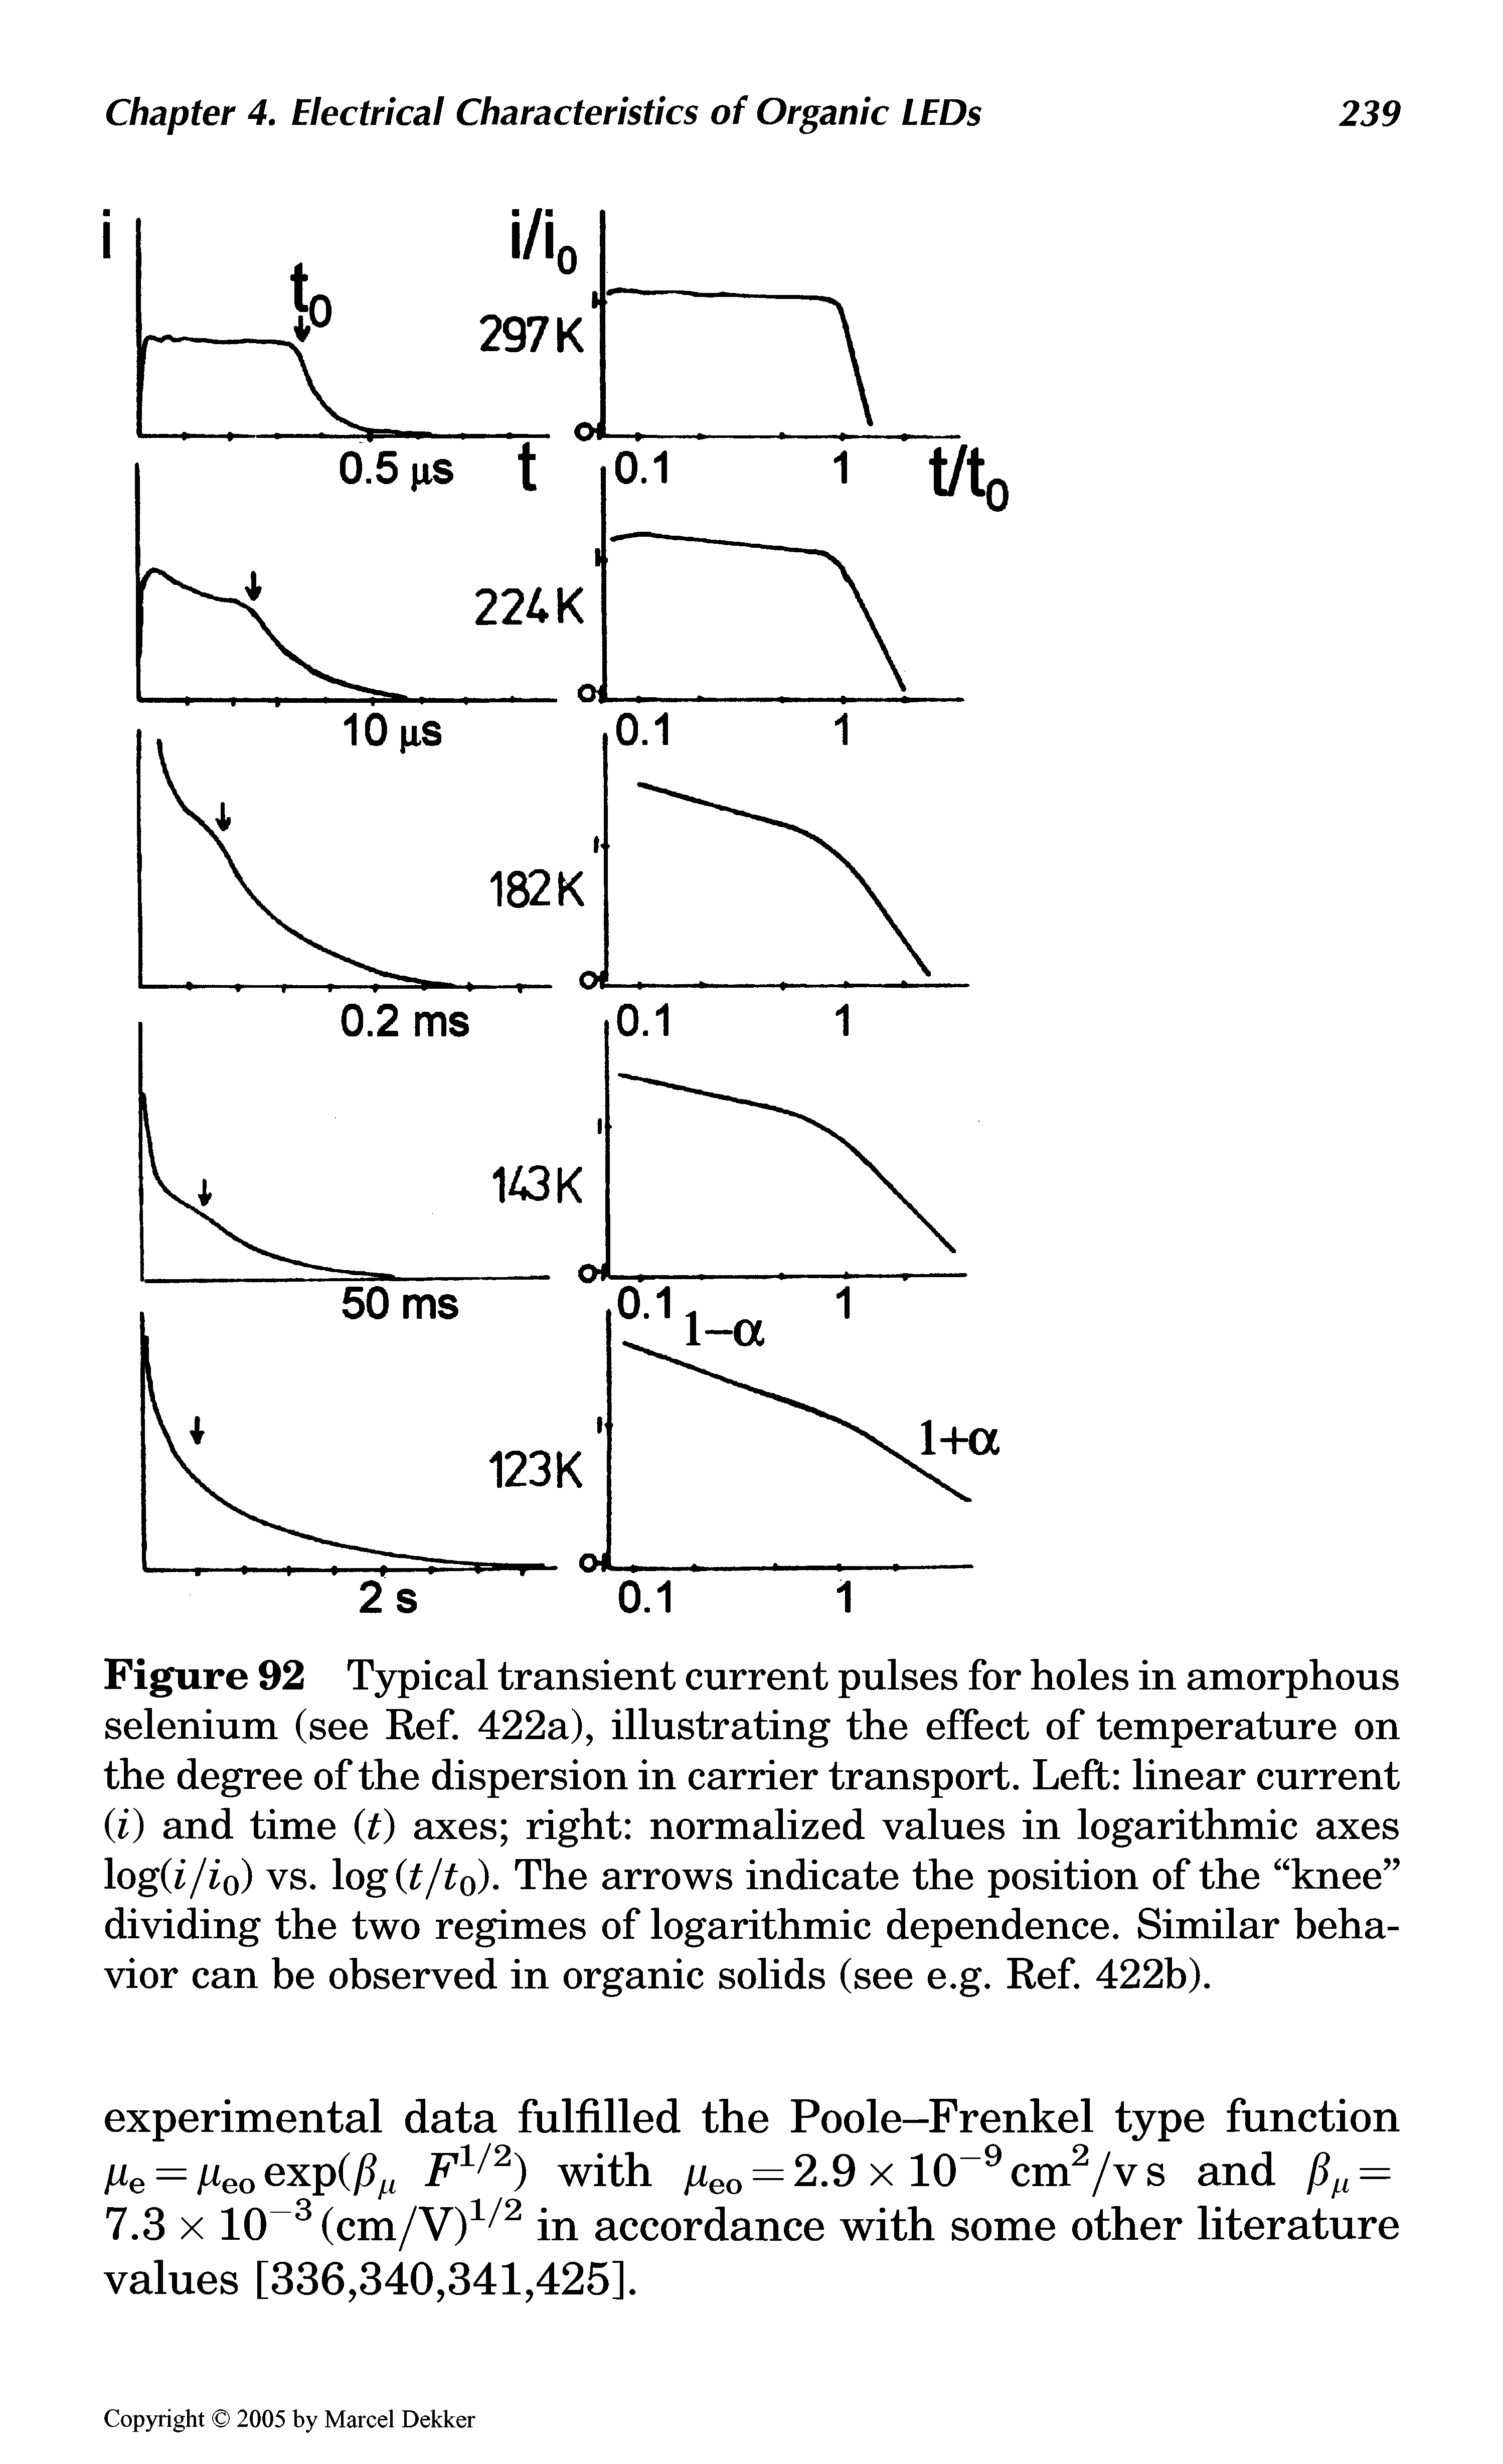 Figure 92 Typical transient current pulses for holes in amorphous selenium (see Ref. 422a), illustrating the effect of temperature on the degree of the dispersion in carrier transport. Left linear current (i) and time (t) axes right normalized values in logarithmic axes log(i/io) vs. log(t/t0). The arrows indicate the position of the knee dividing the two regimes of logarithmic dependence. Similar behavior can be observed in organic solids (see e.g. Ref. 422b).